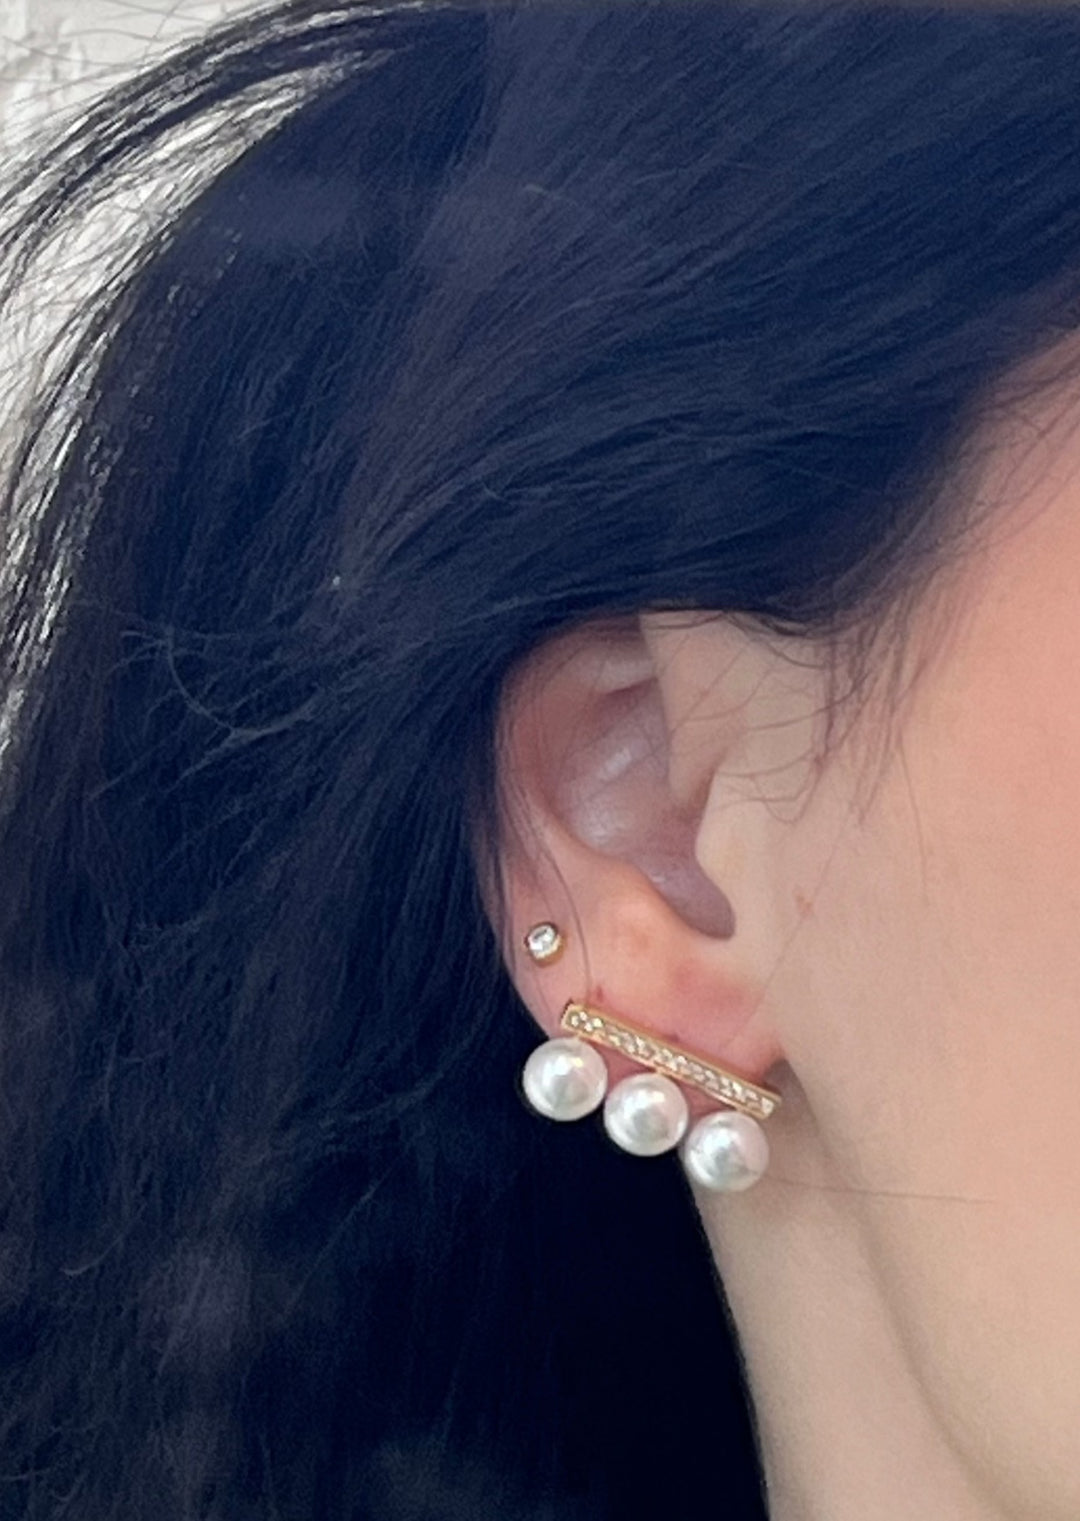 Triple Pearl Earring, Jewelry, Adeline, Adeline, dallas boutique, dallas texas, texas boutique, women's boutique dallas, adeline boutique, dallas boutique, trendy boutique, affordable boutique